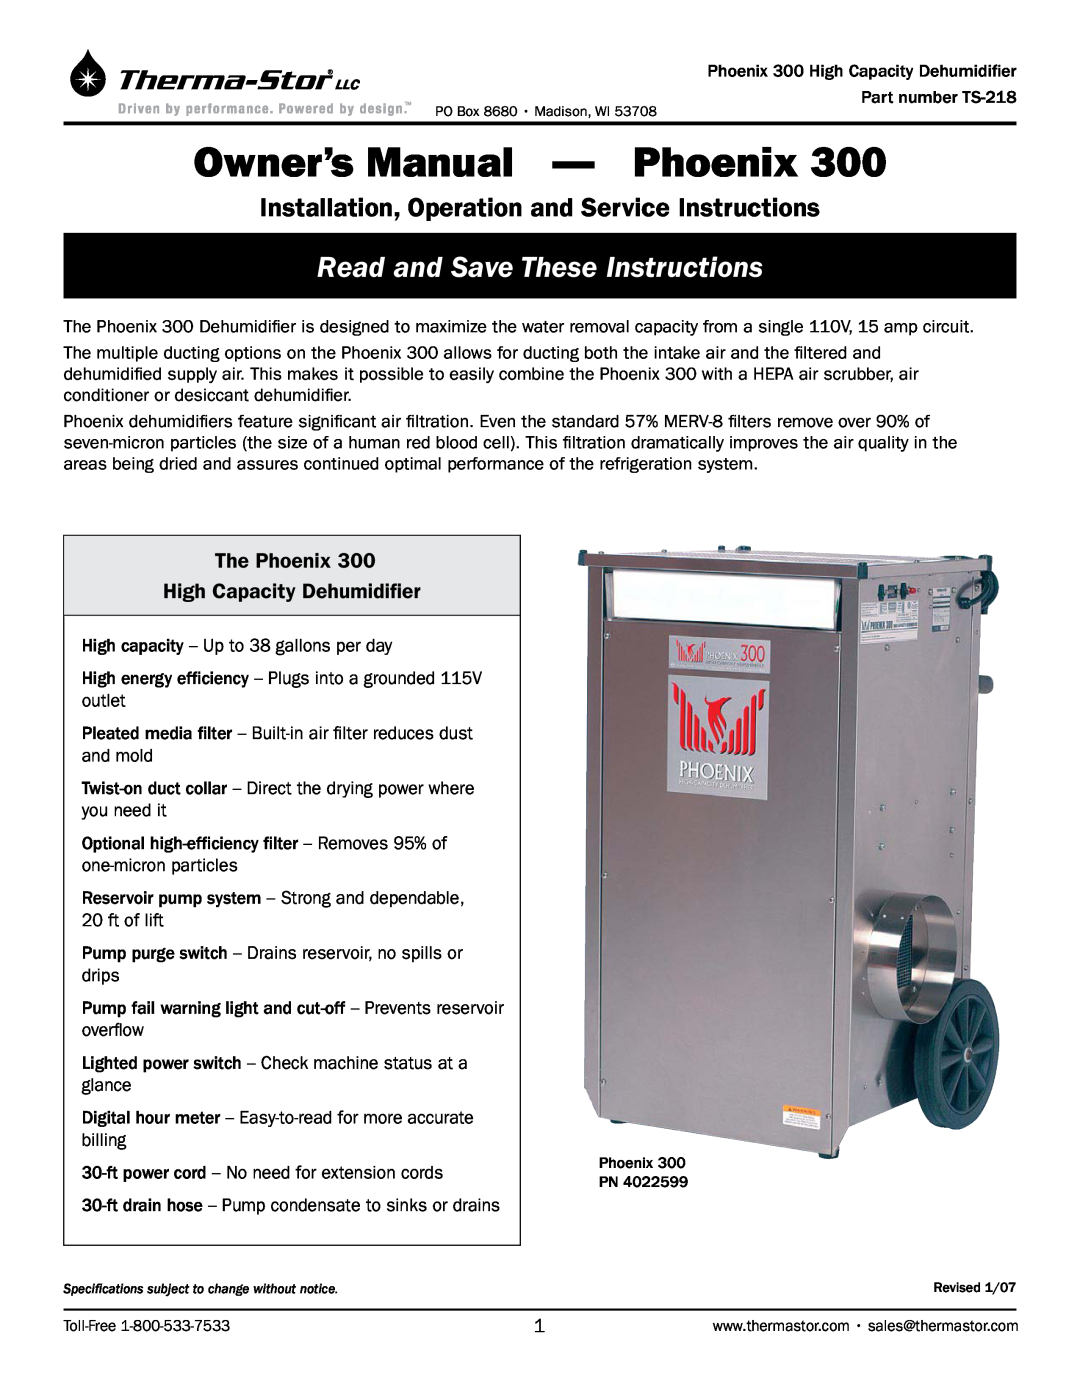 Therma-Stor Products Group 300 owner manual The Phoenix High Capacity Dehumidifier, Read and Save These Instructions 